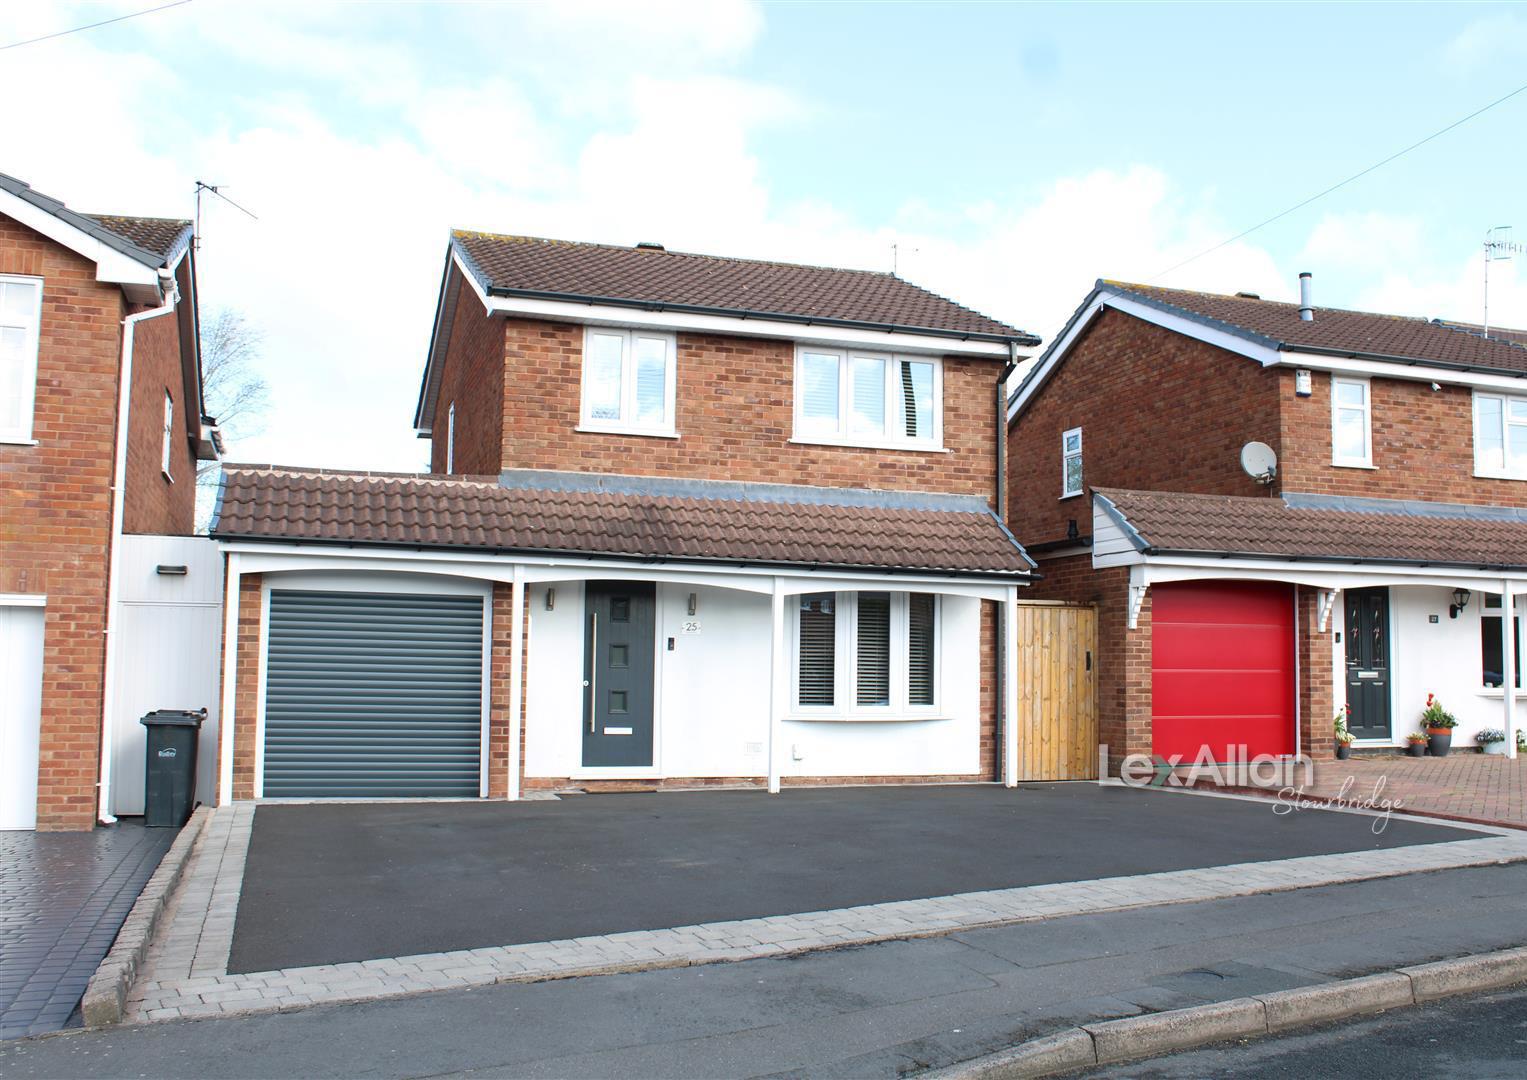 3 bed detached house for sale in Aldgate Drive, Brierley Hill  - Property Image 1